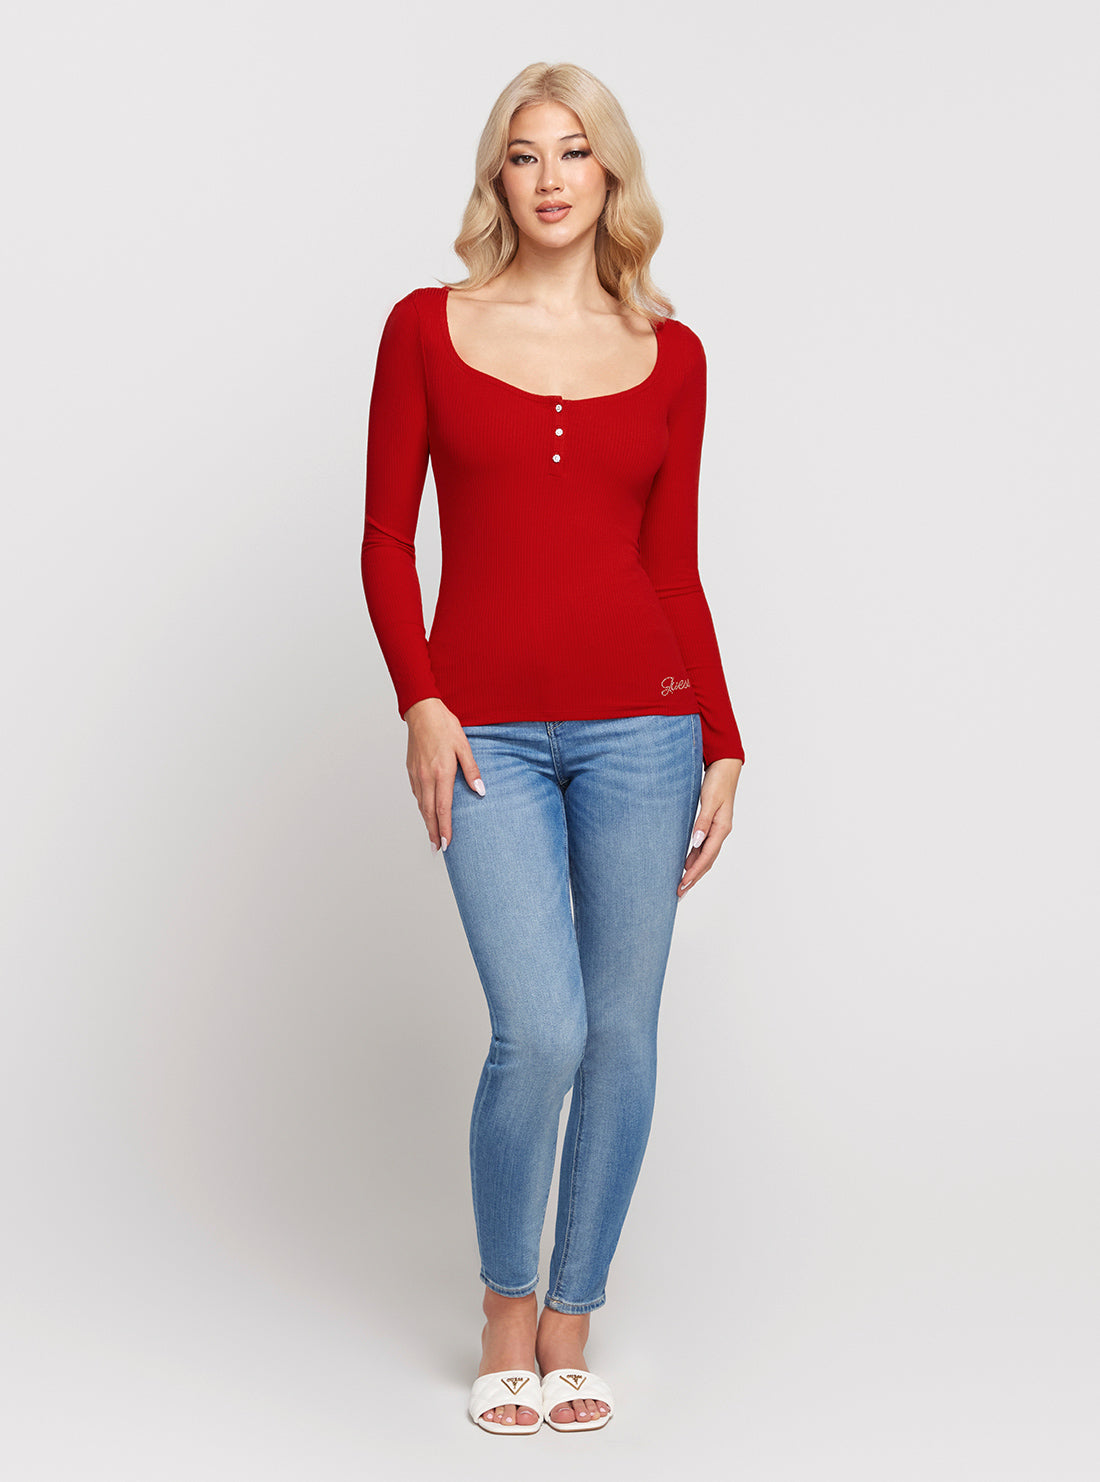 GUESS Red Karlee Long Sleeve Button Top  full view